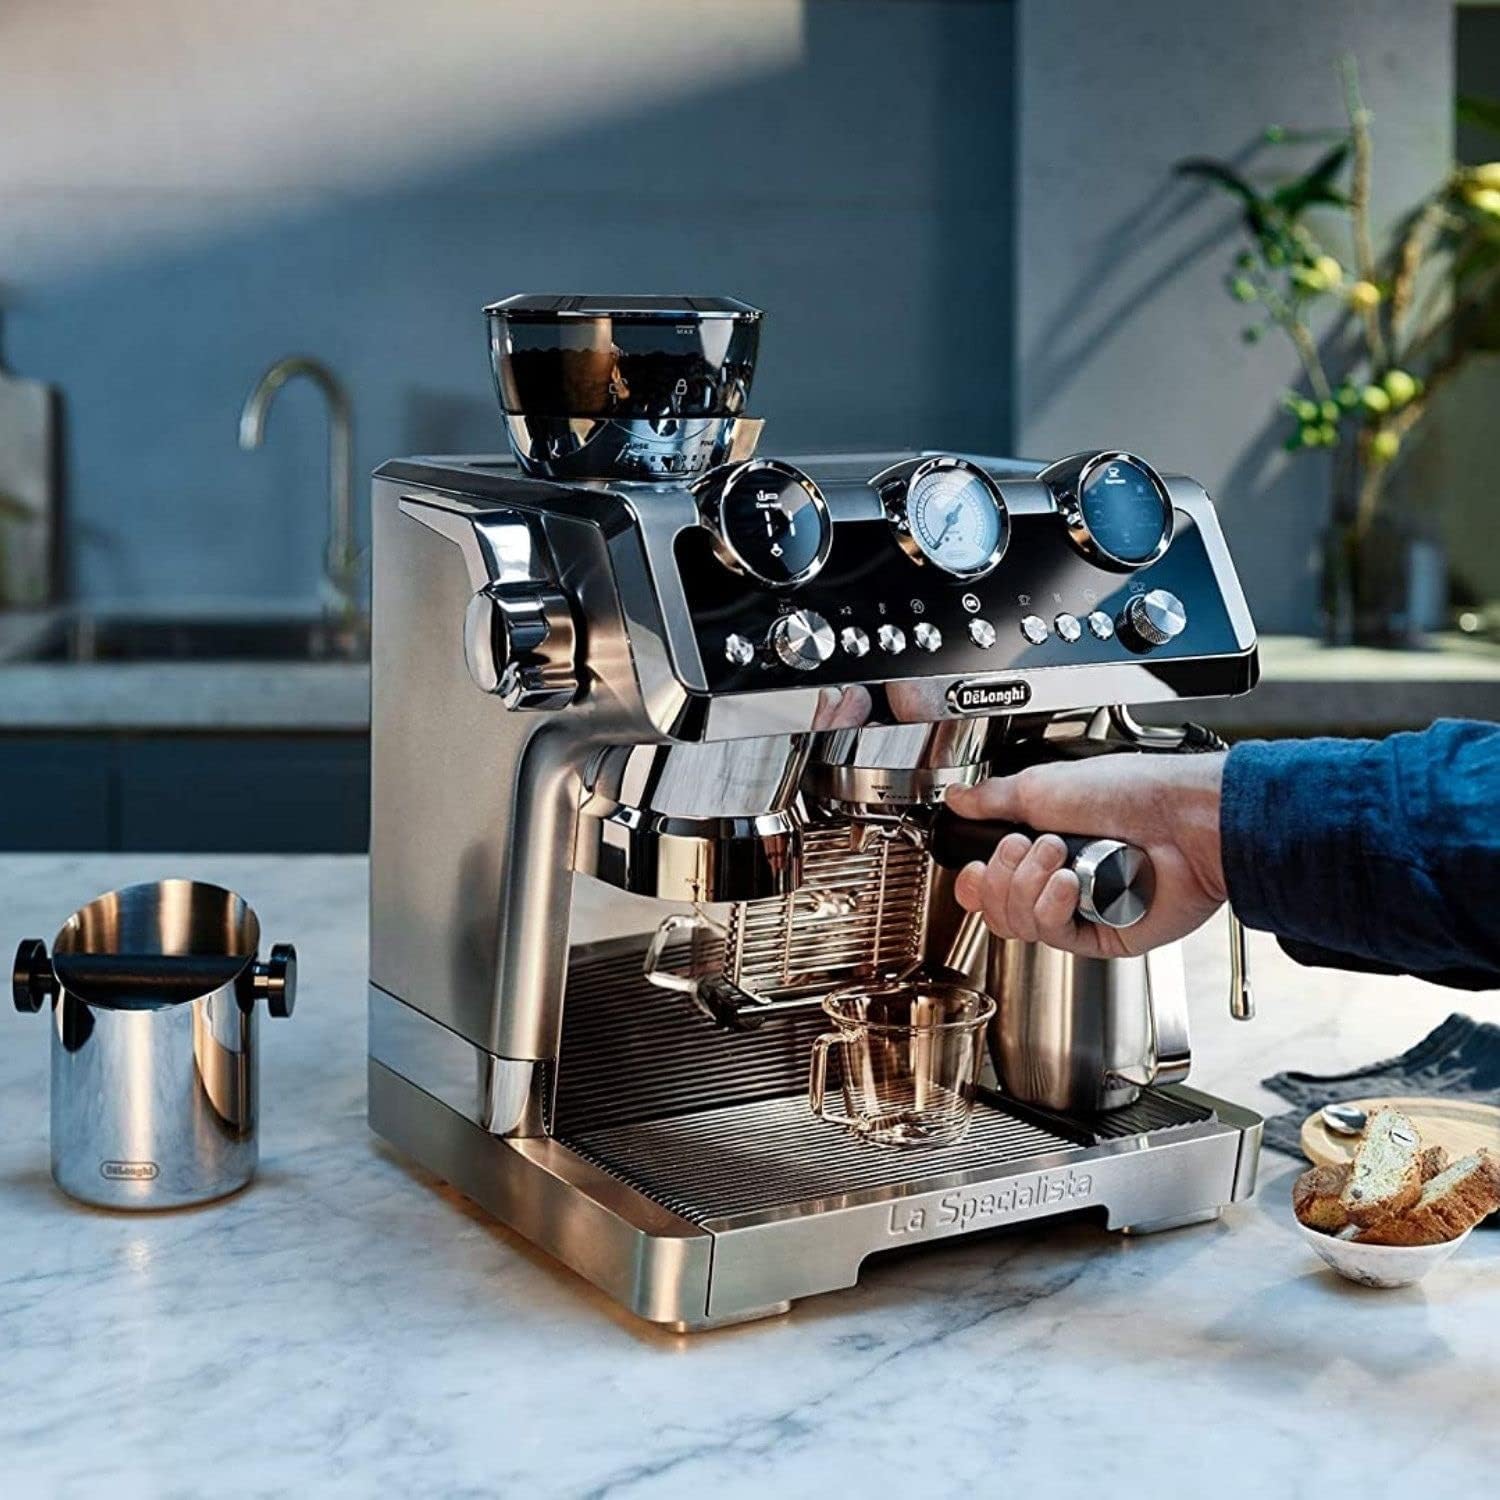 De'Longhi La Specialista Maestro, Pump Espresso Coffee Machine, With Sensor Grinding Technology, Smart Tamping Station, Pre Infusion, Manual and Automatic Milk Frothing Options, EC9665.M (Silver)